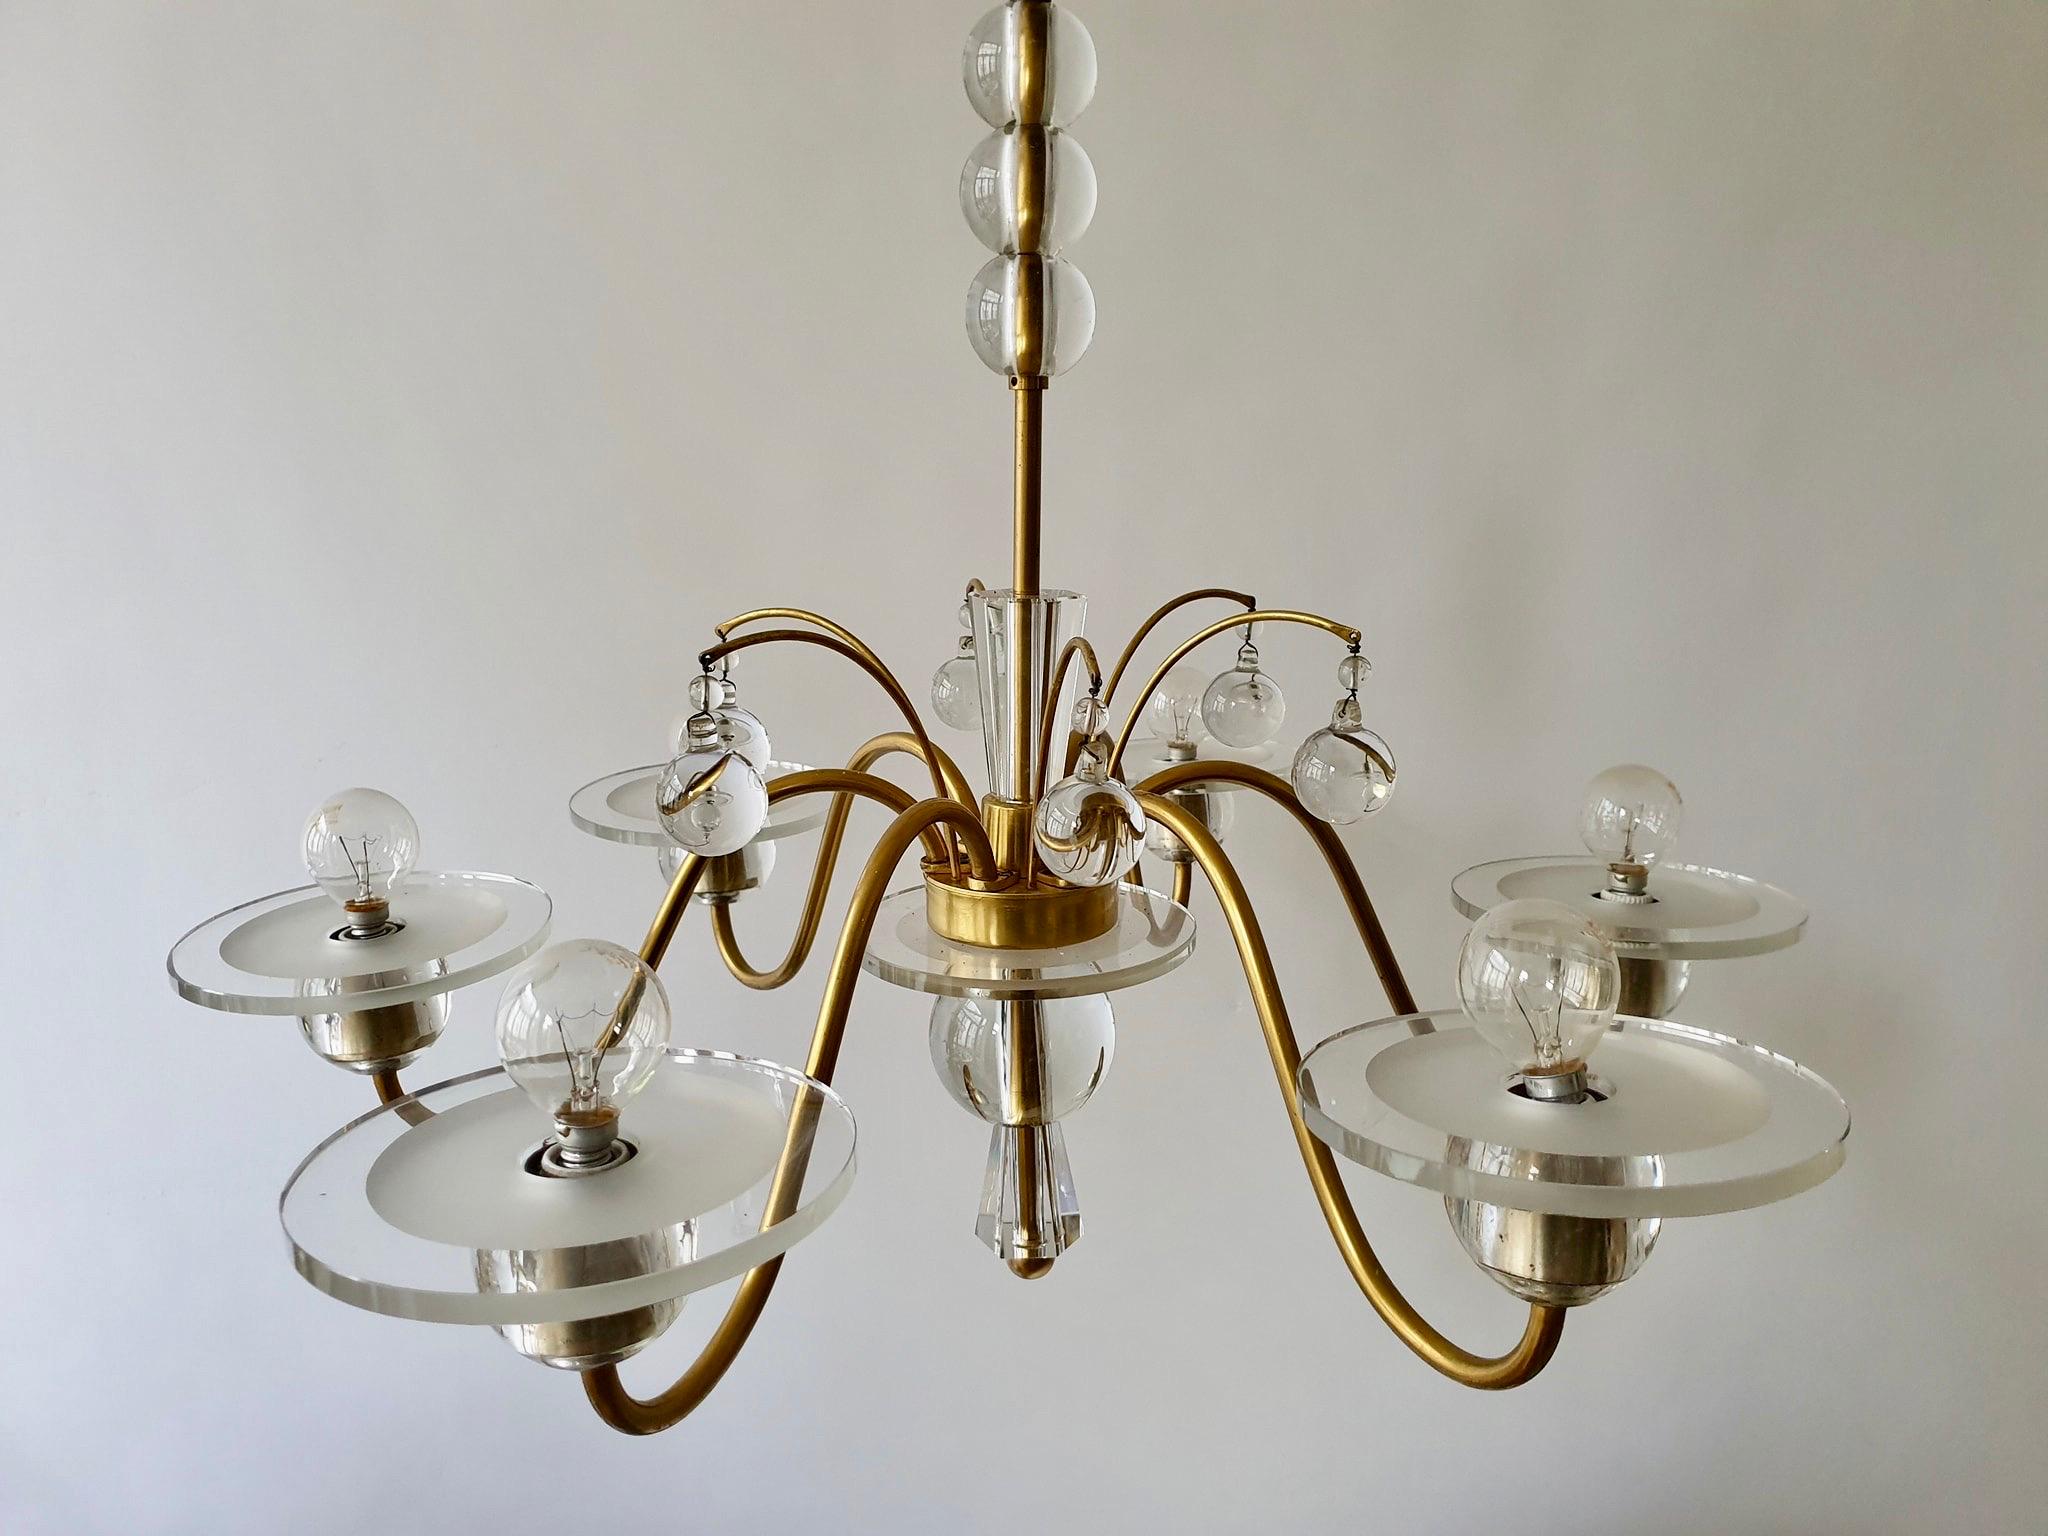 Art Deco Brass and Glass Chandelier In Good Condition For Sale In Antwerp, BE